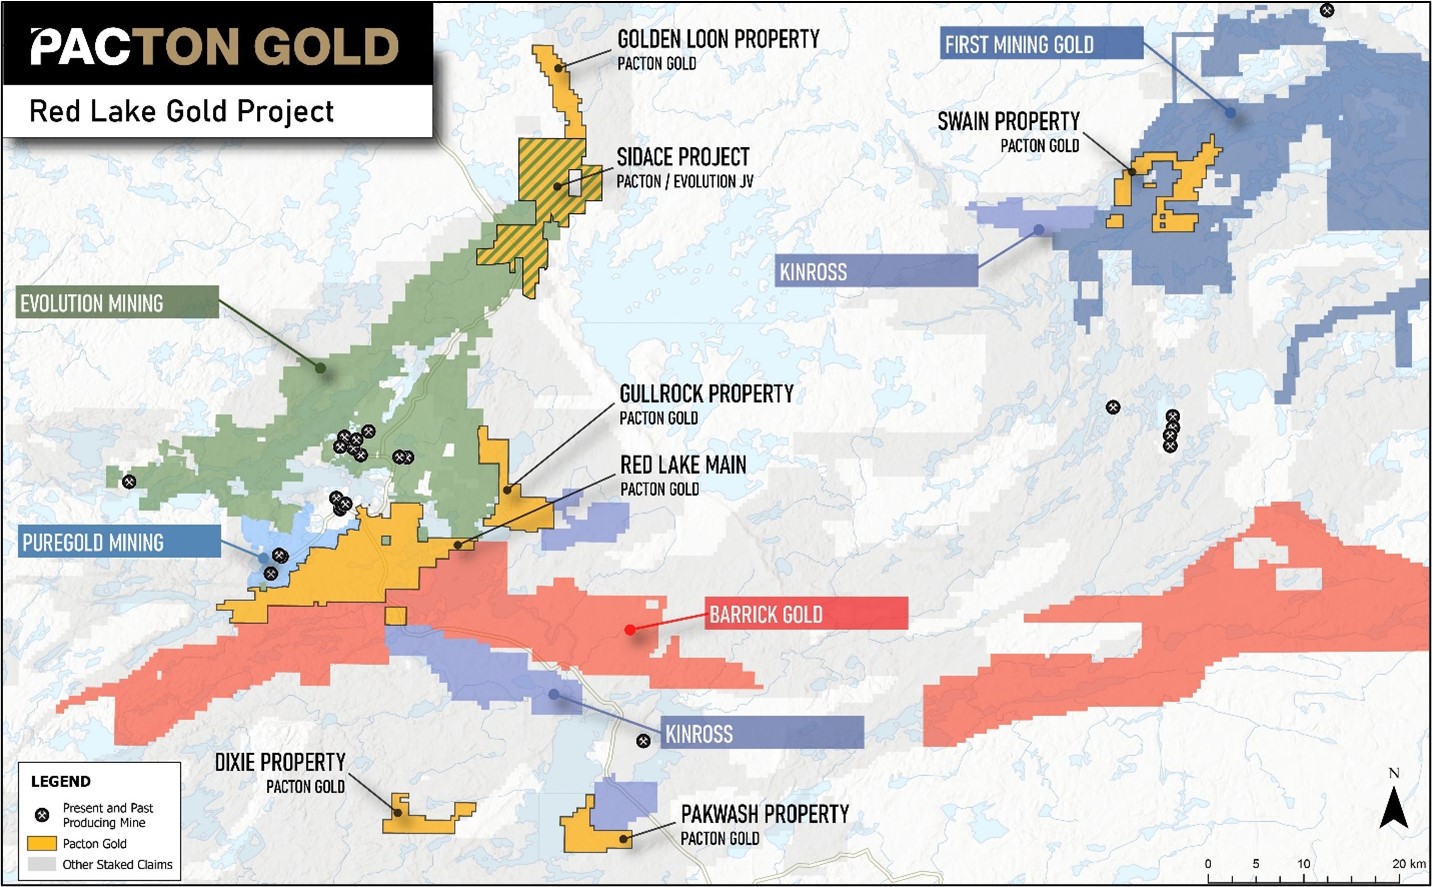 Pacton Gold, Tuesday, April 12, 2022, Press release picture